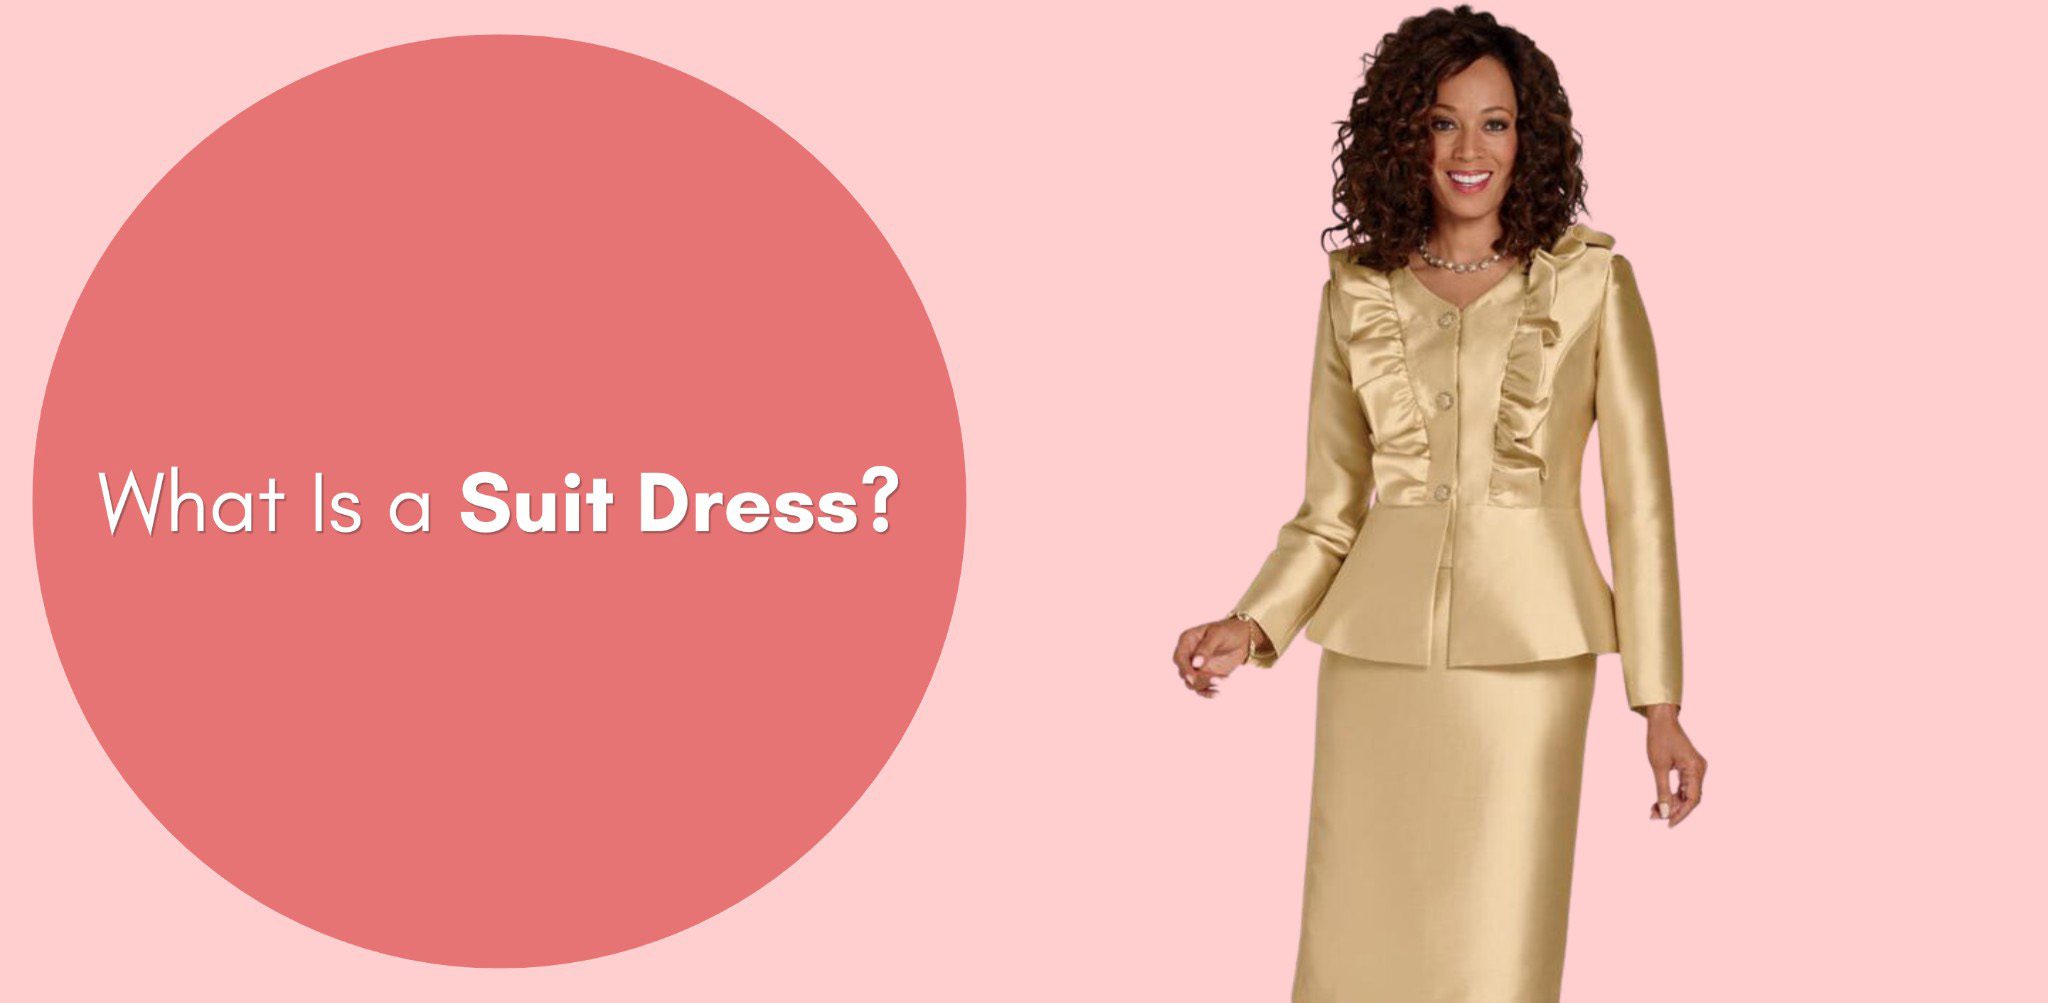 What is a Suit Dress